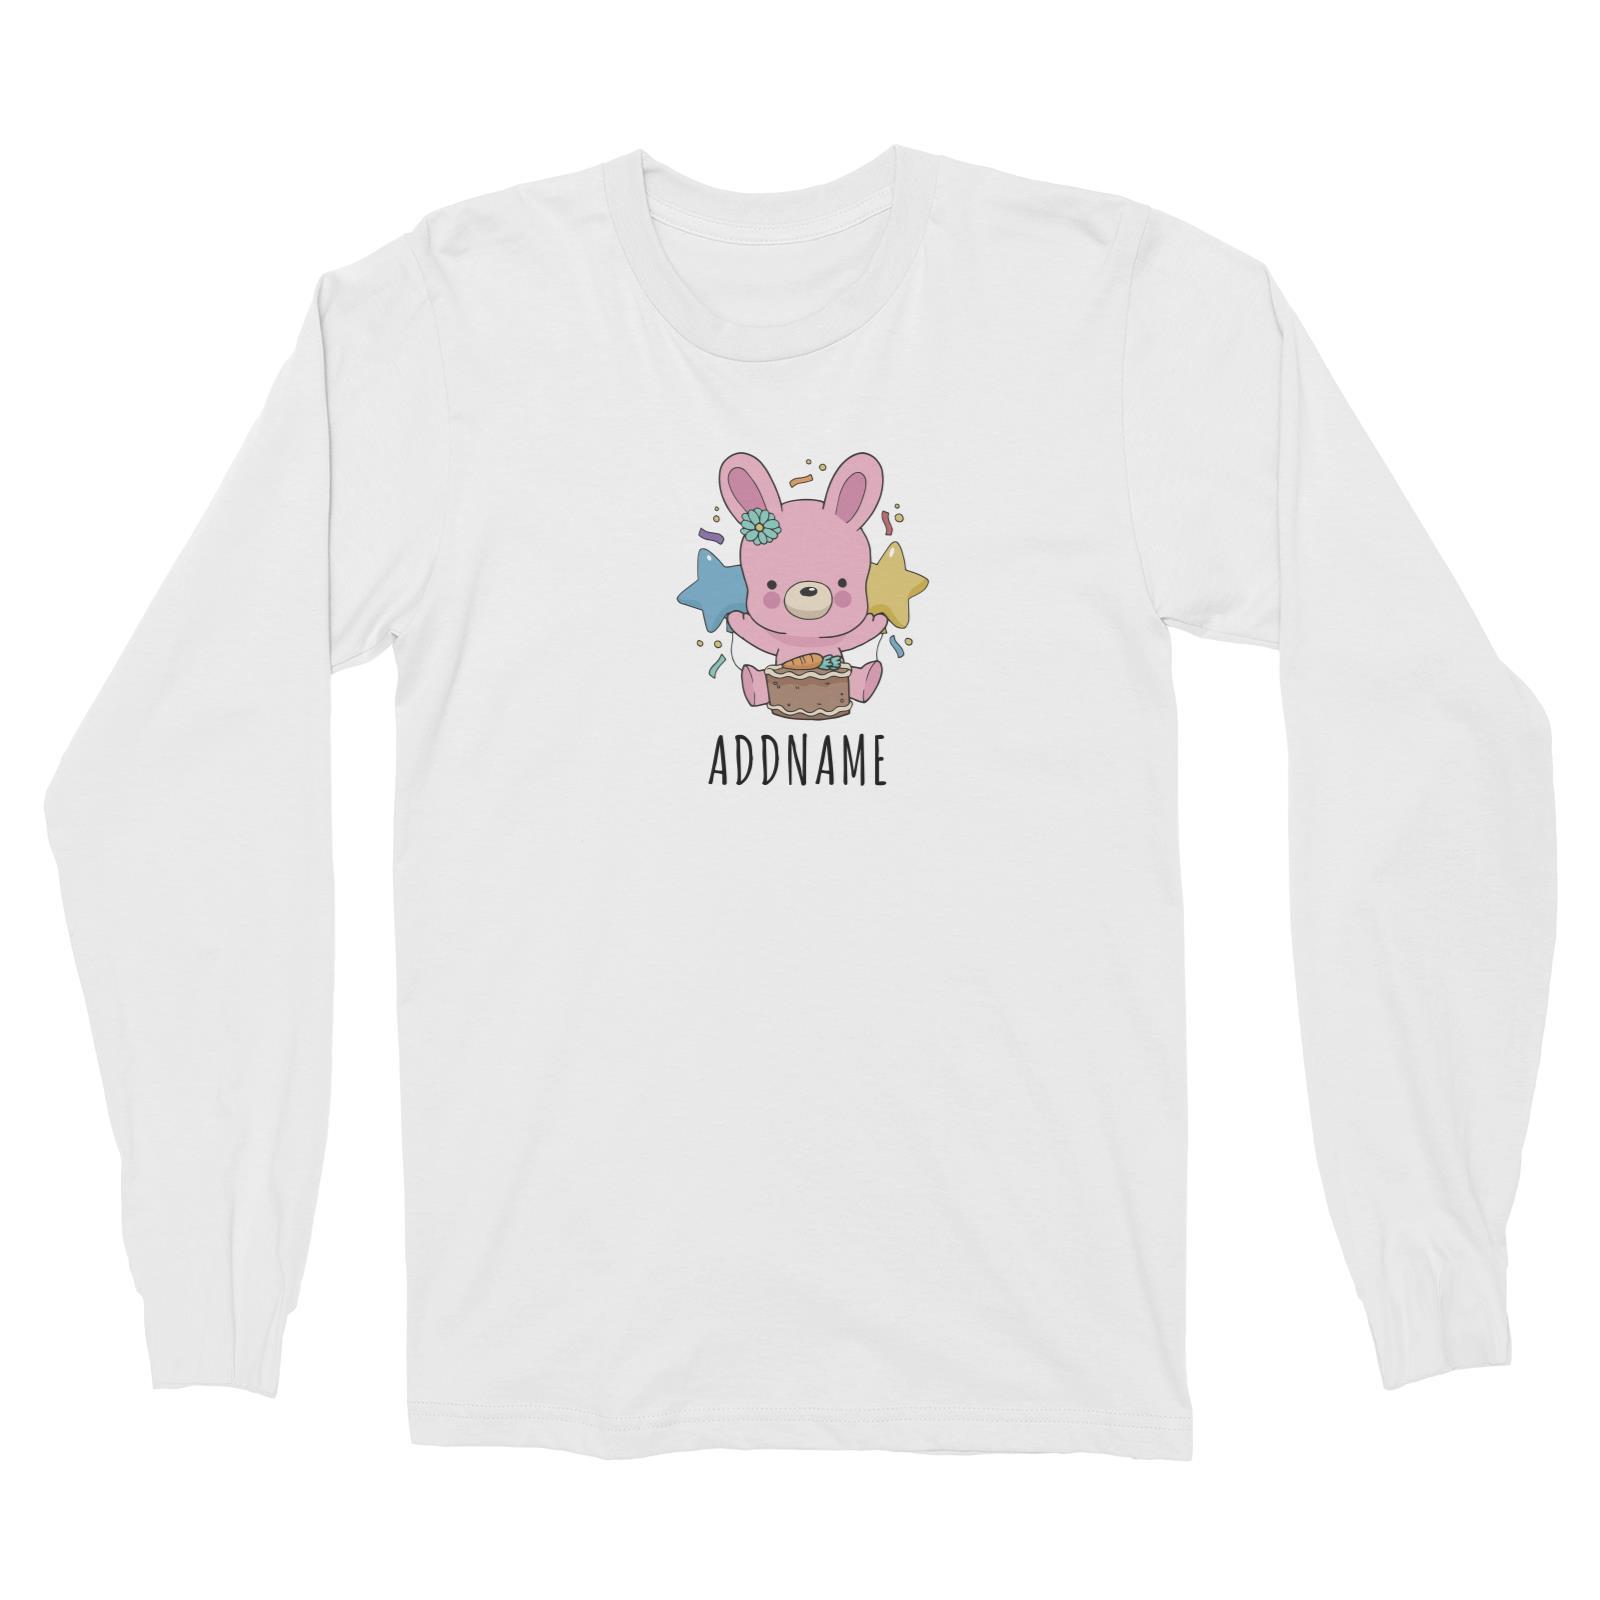 Birthday Sketch Animals Rabbit with Carrot Cake Addname Long Sleeve Unisex T-Shirt